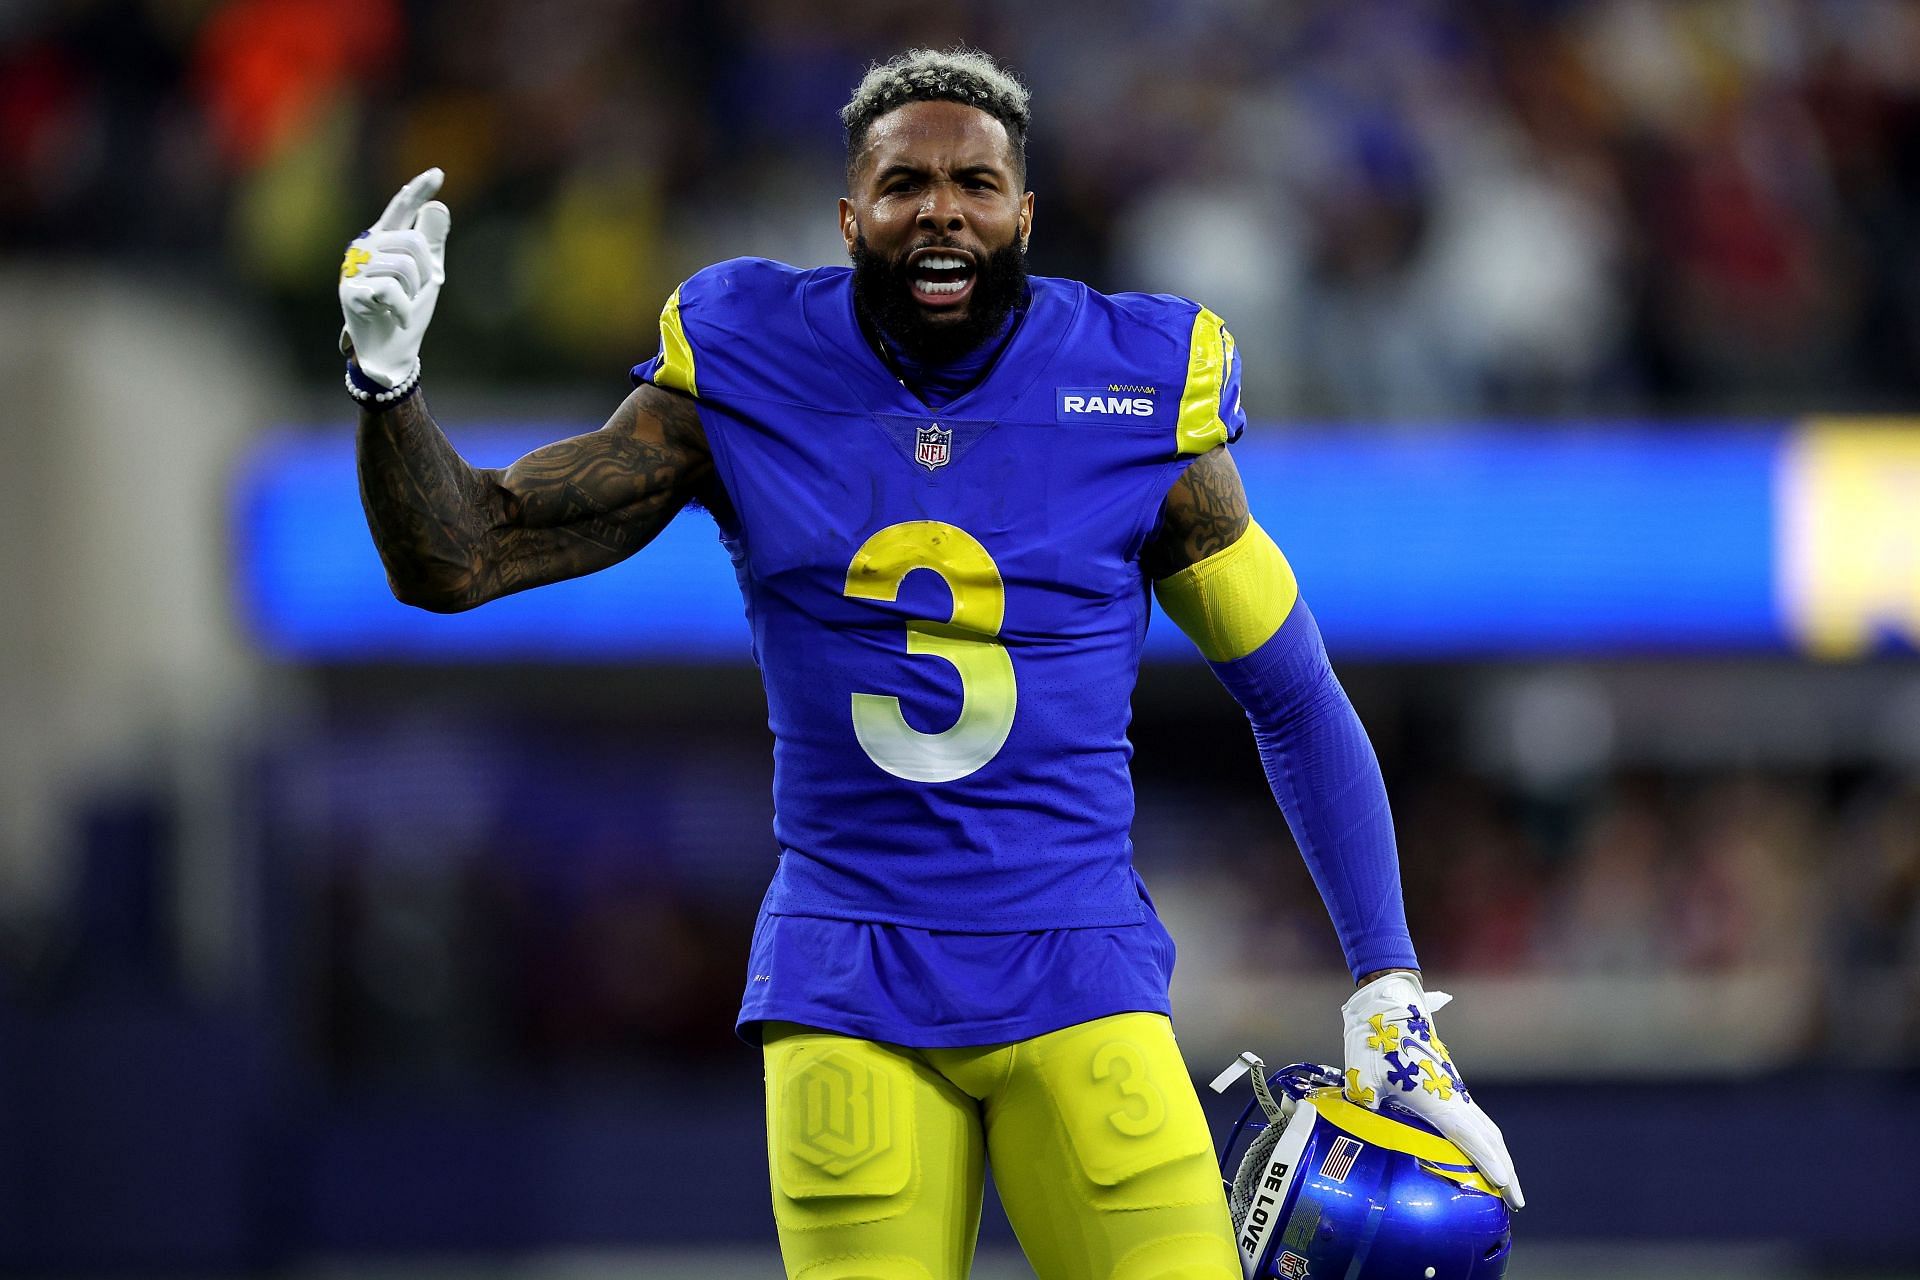 BEST PHOTOS: Best of Rams wide receivers from 2022